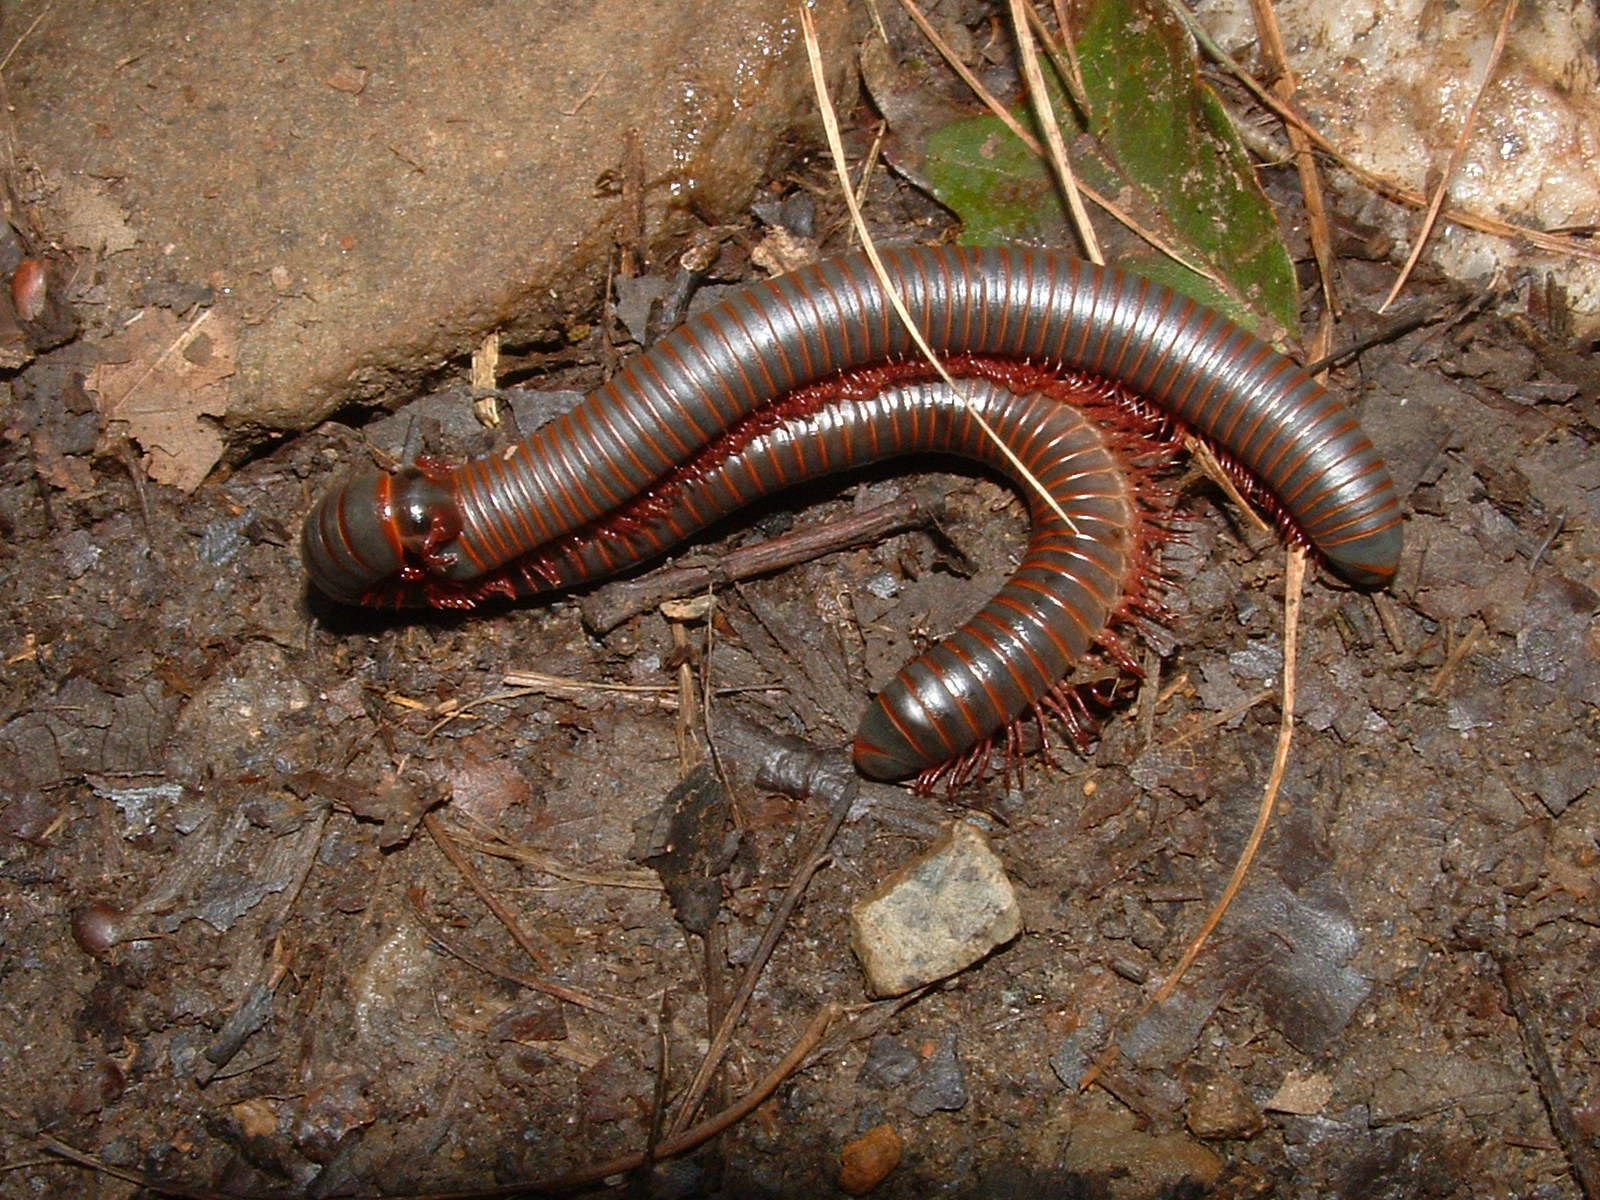 Coupling Millipede On Muddy Ground Background